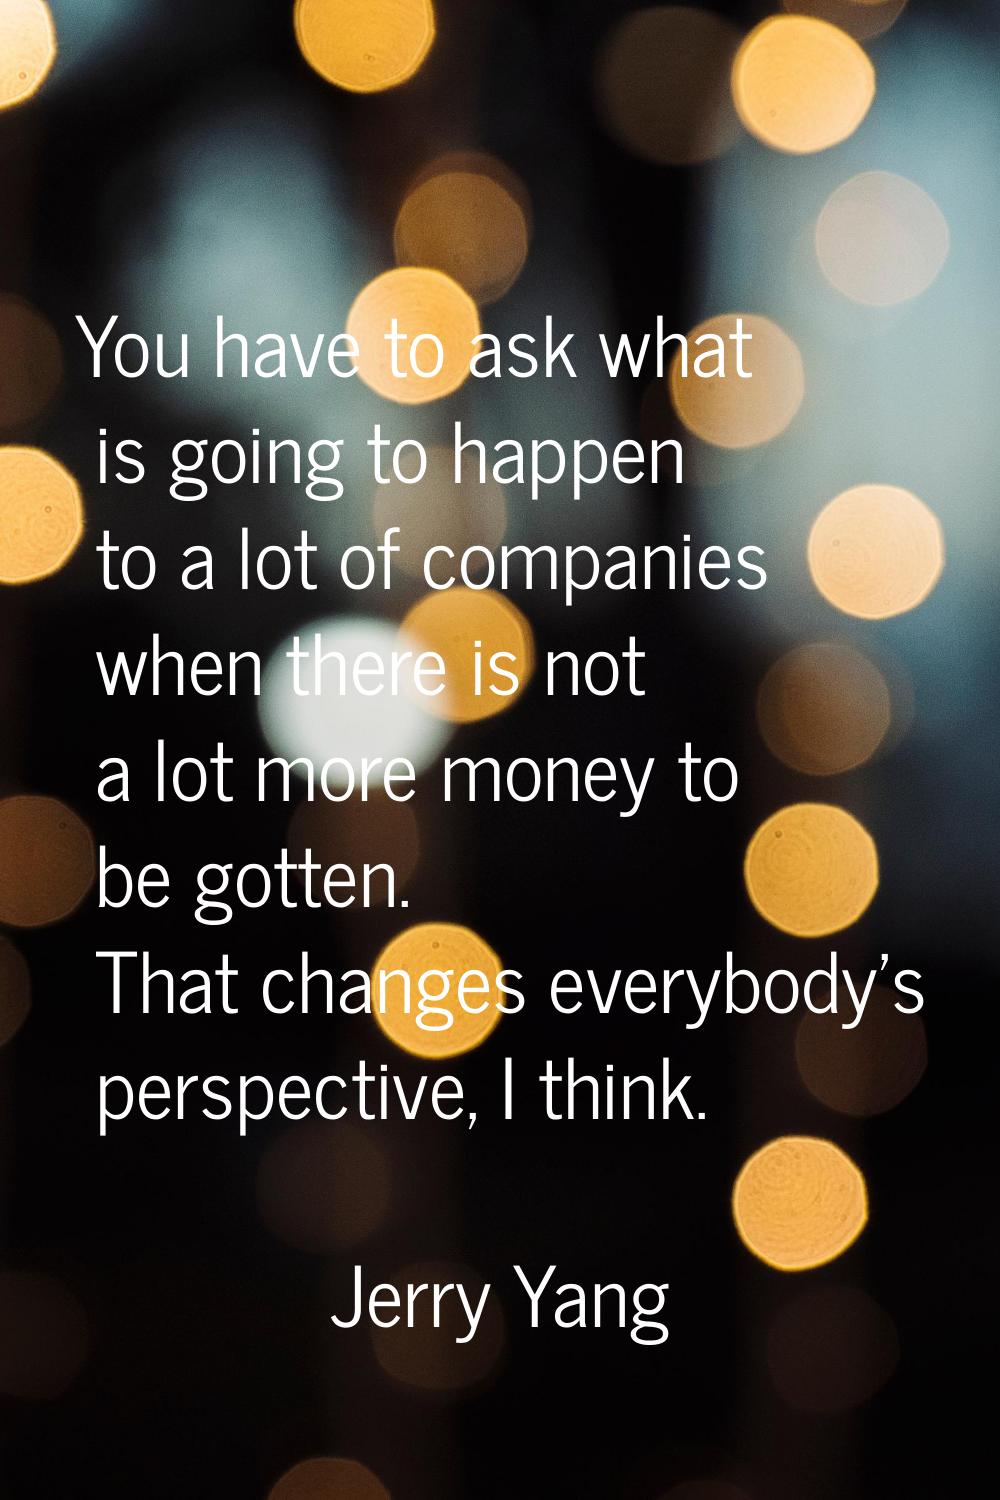 You have to ask what is going to happen to a lot of companies when there is not a lot more money to